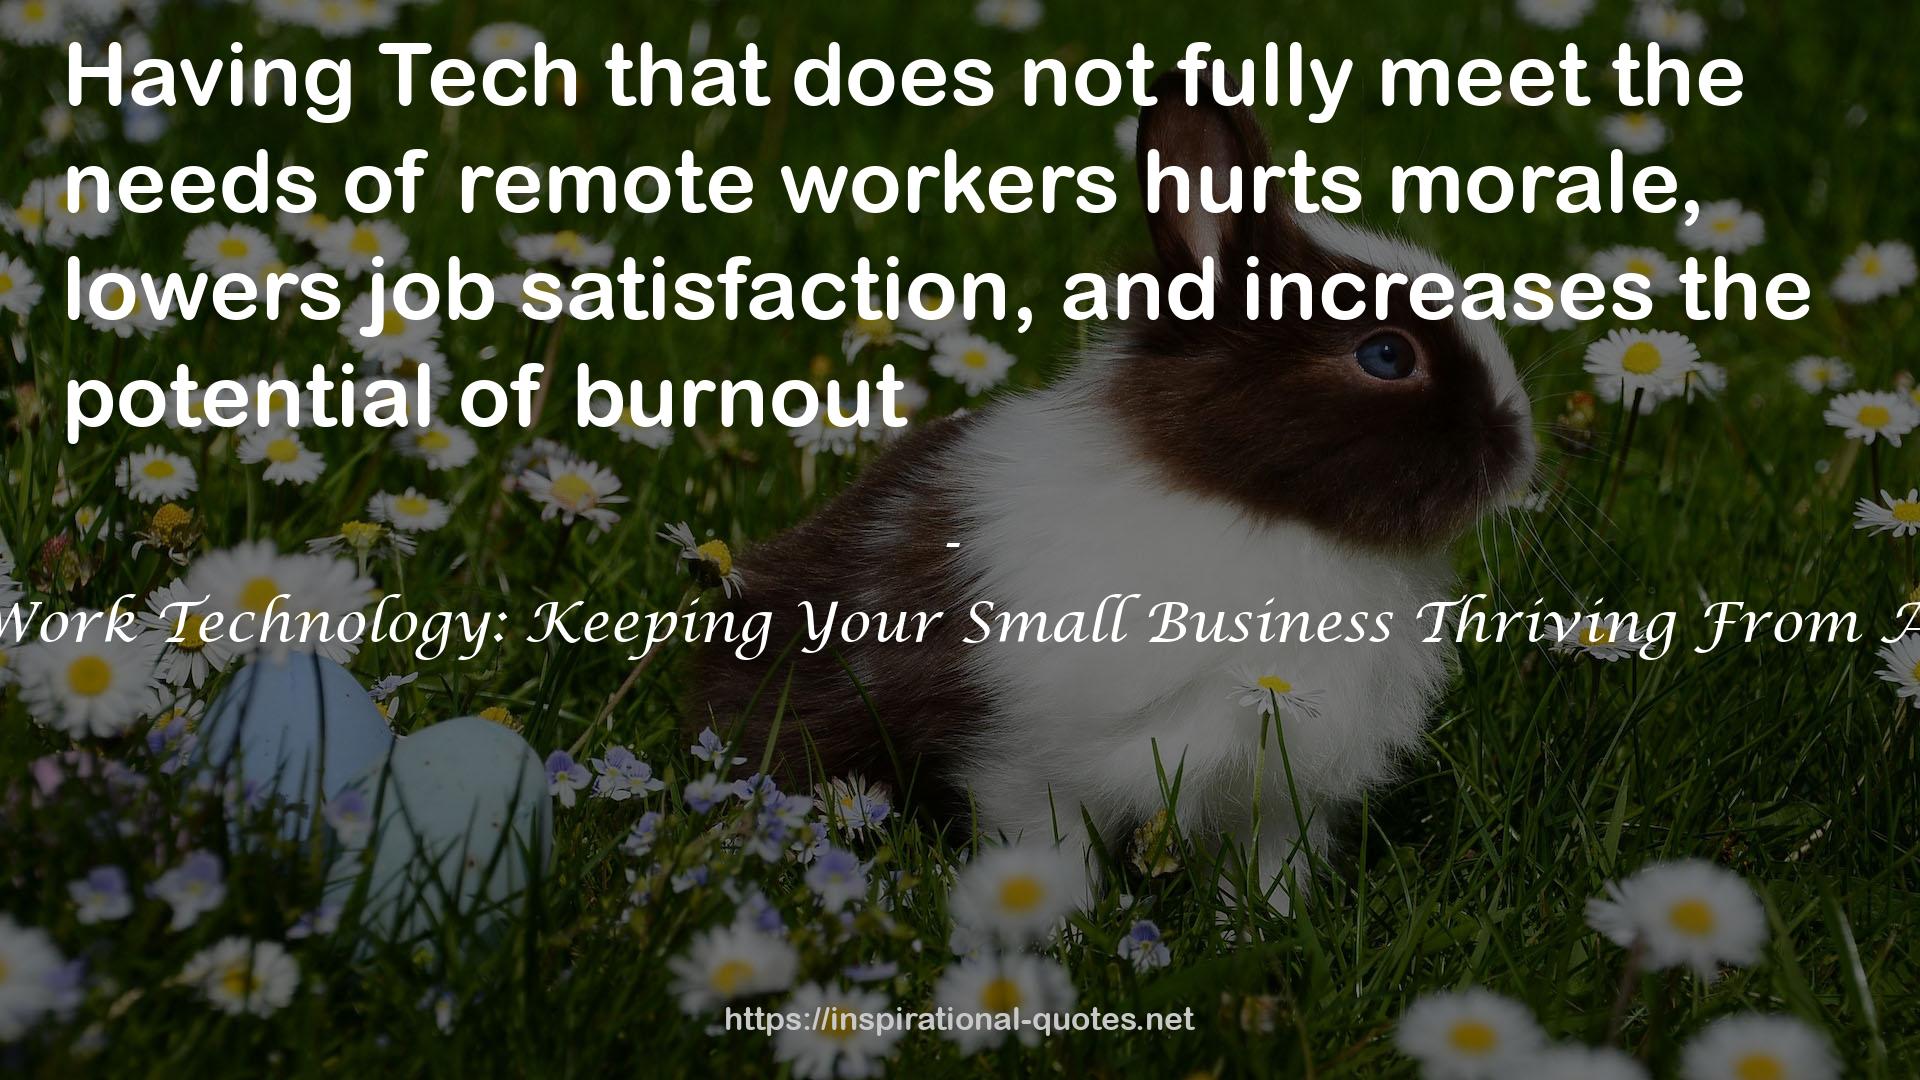 Remote Work Technology: Keeping Your Small Business Thriving From Anywhere QUOTES